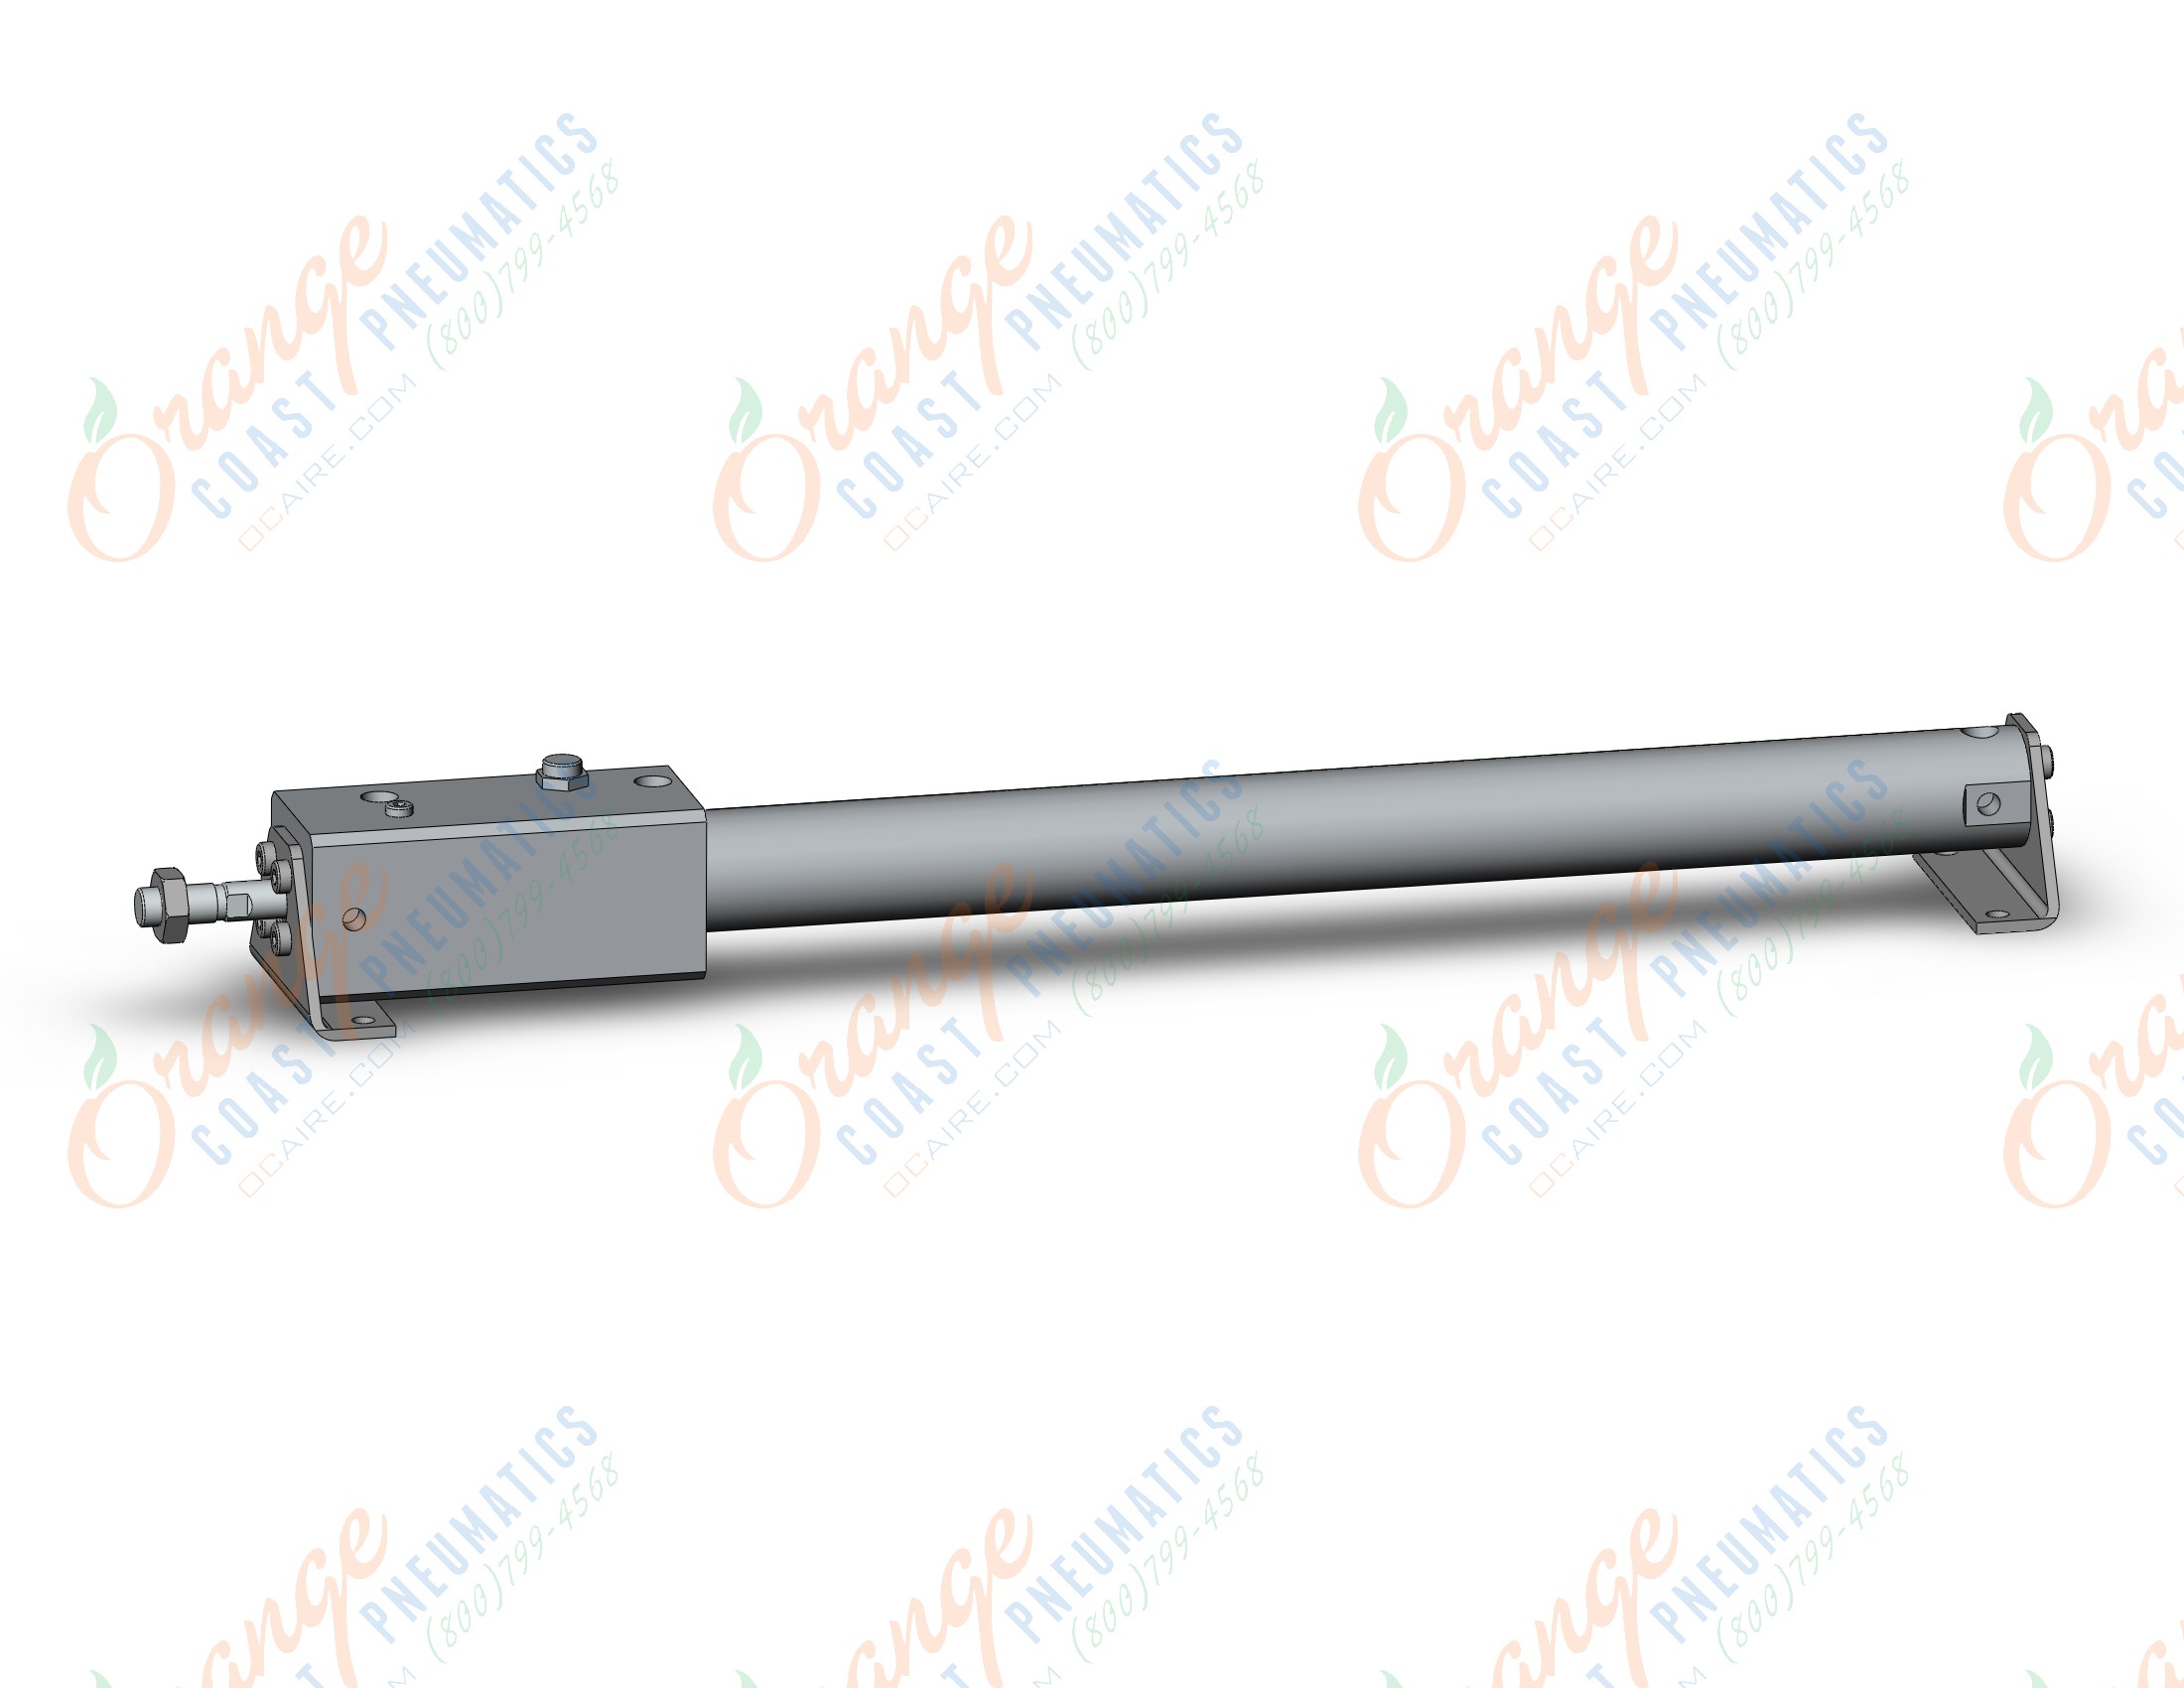 SMC CNGLN25-300-D 25mm cng double acting, CNG CYLINDER W/LOCK